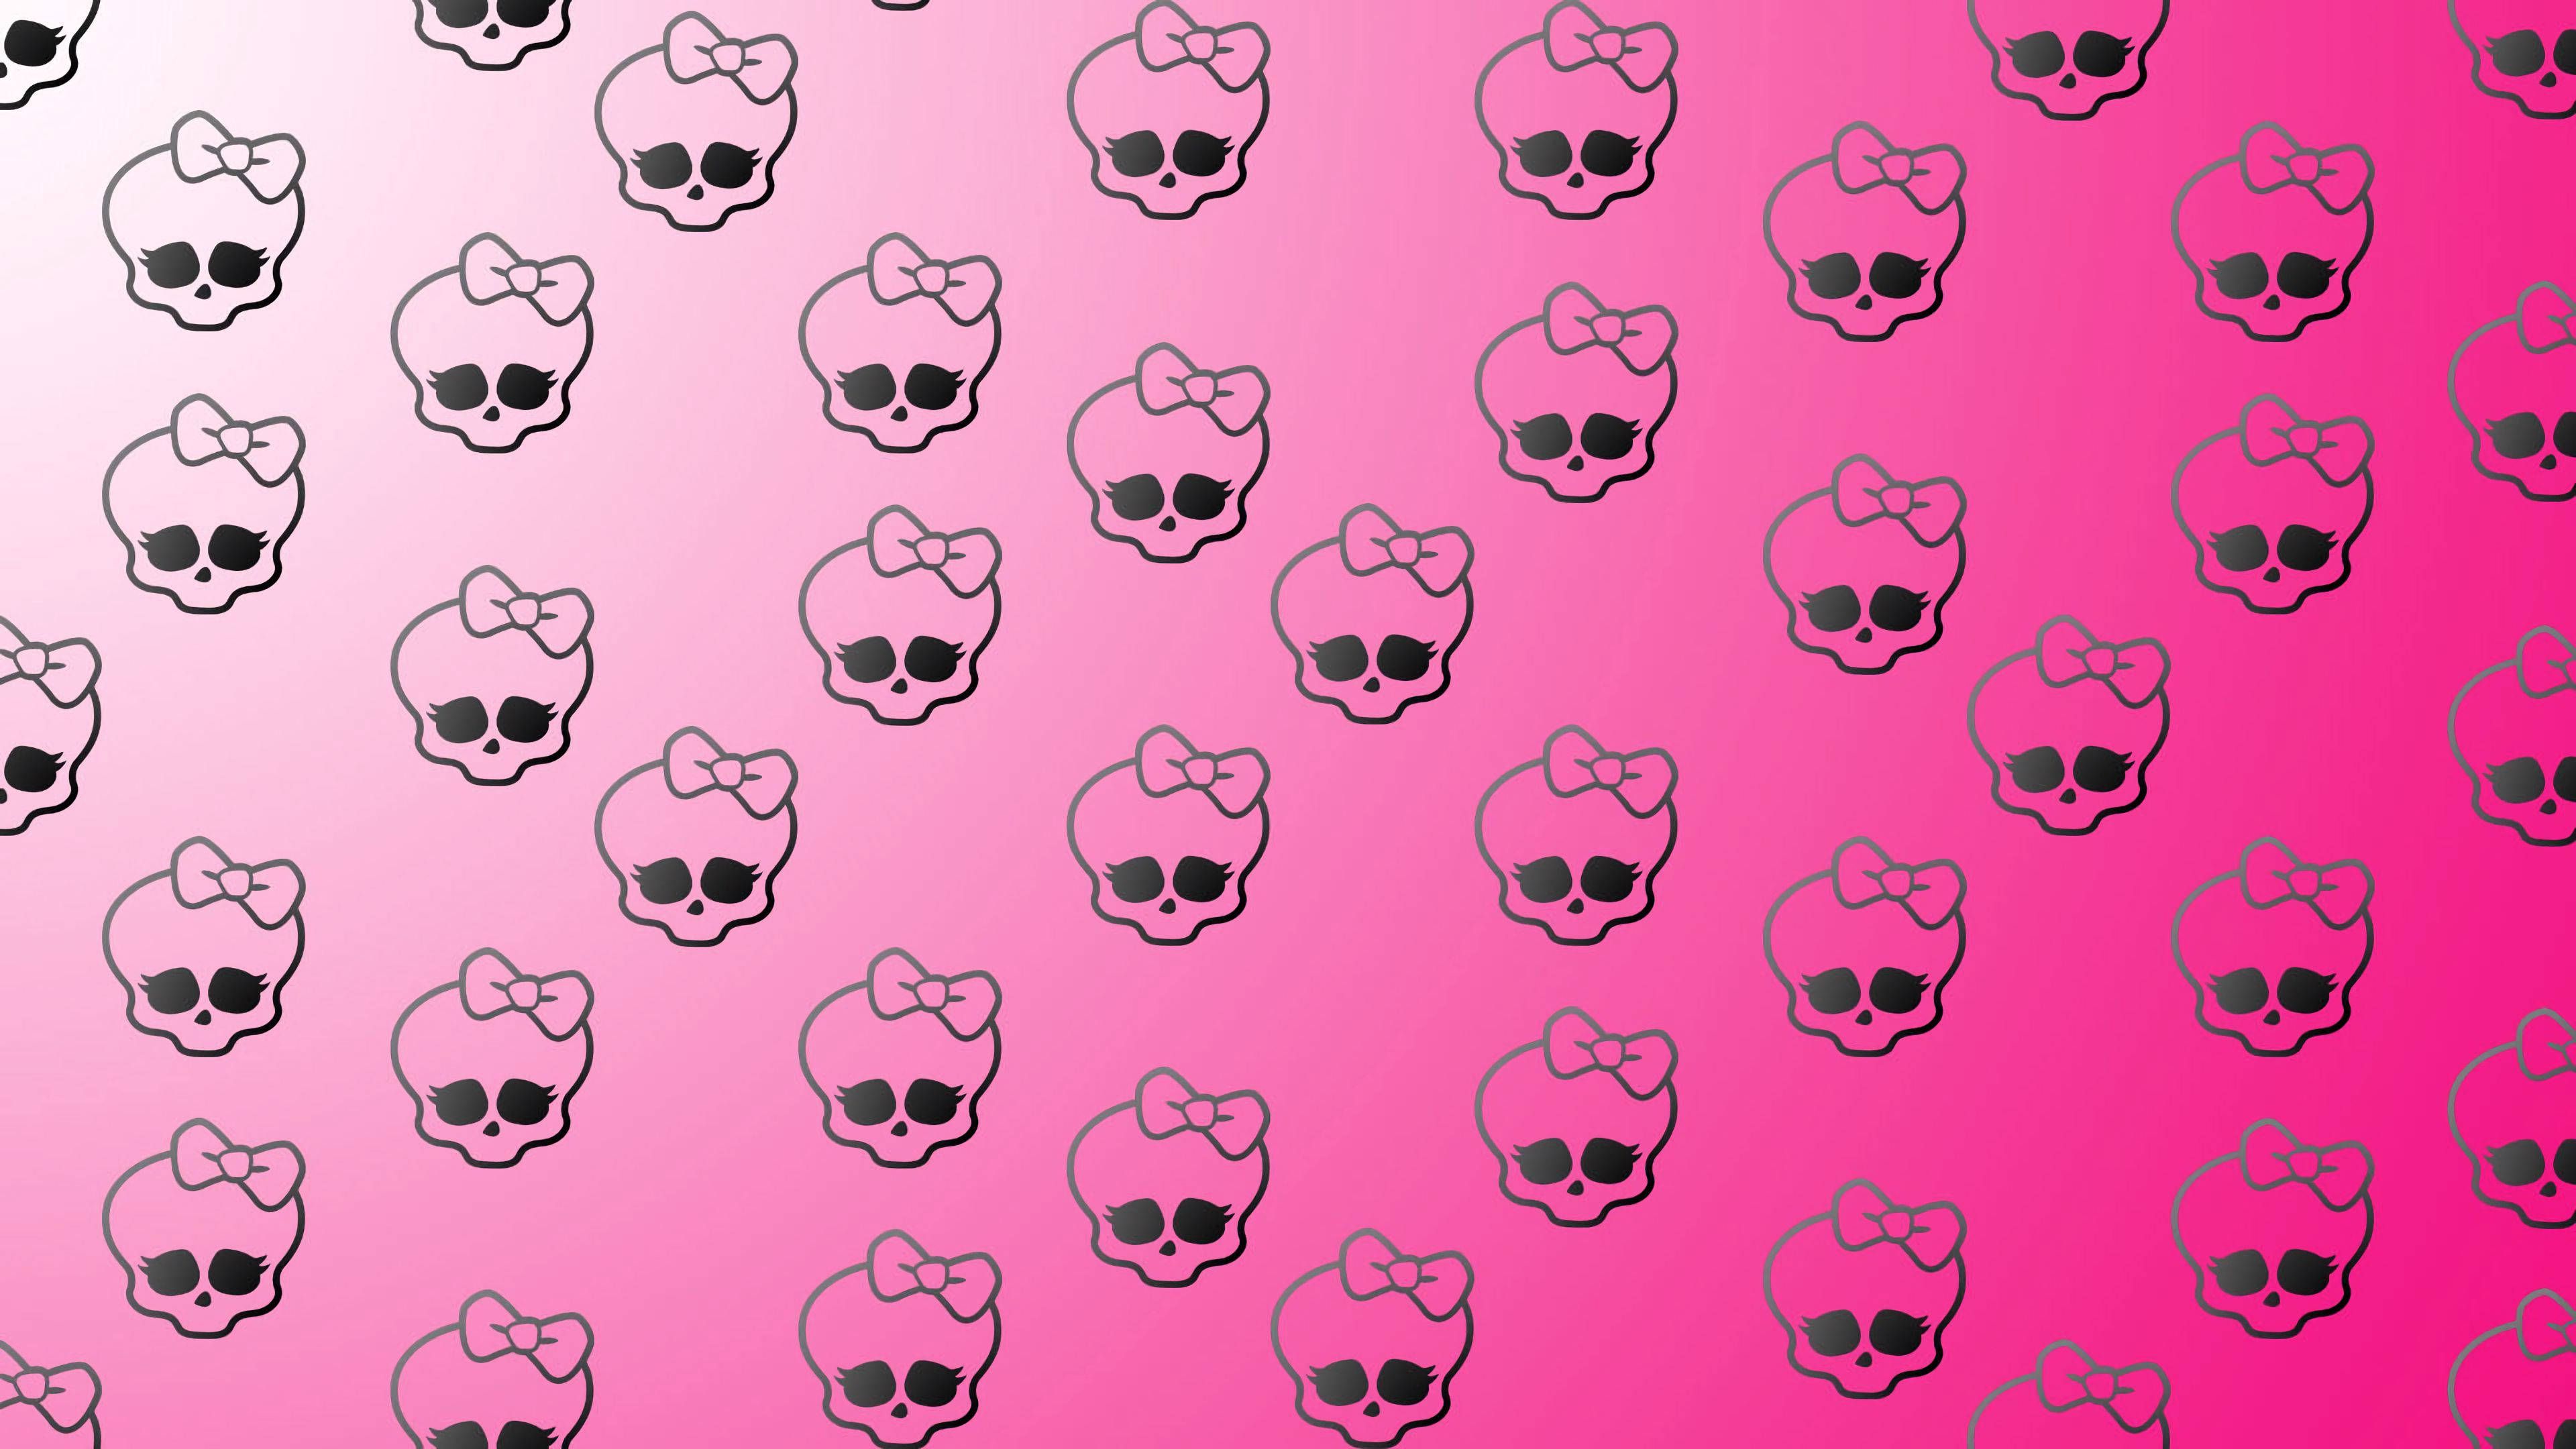 A pattern of pink skulls with sunglasses and bows on a pink gradient background - Skull